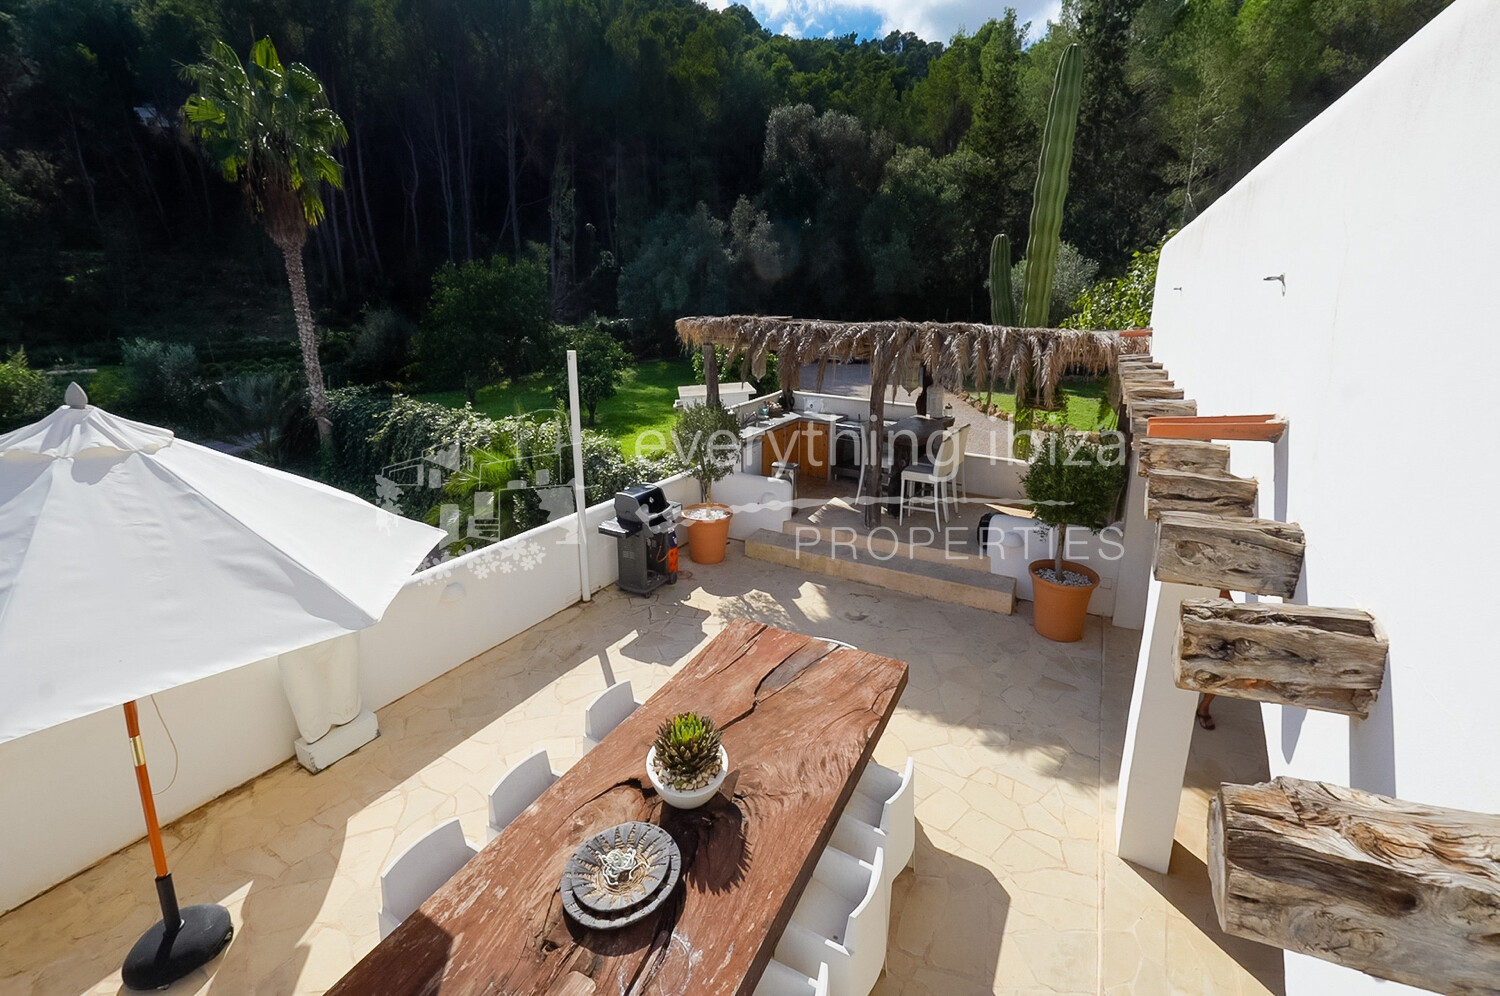 Stunning Villa on a Large Plot in the Peaceful Countryside of Sant Miguel, ref. 1513, for sale in Ibiza by everything ibiza Properties